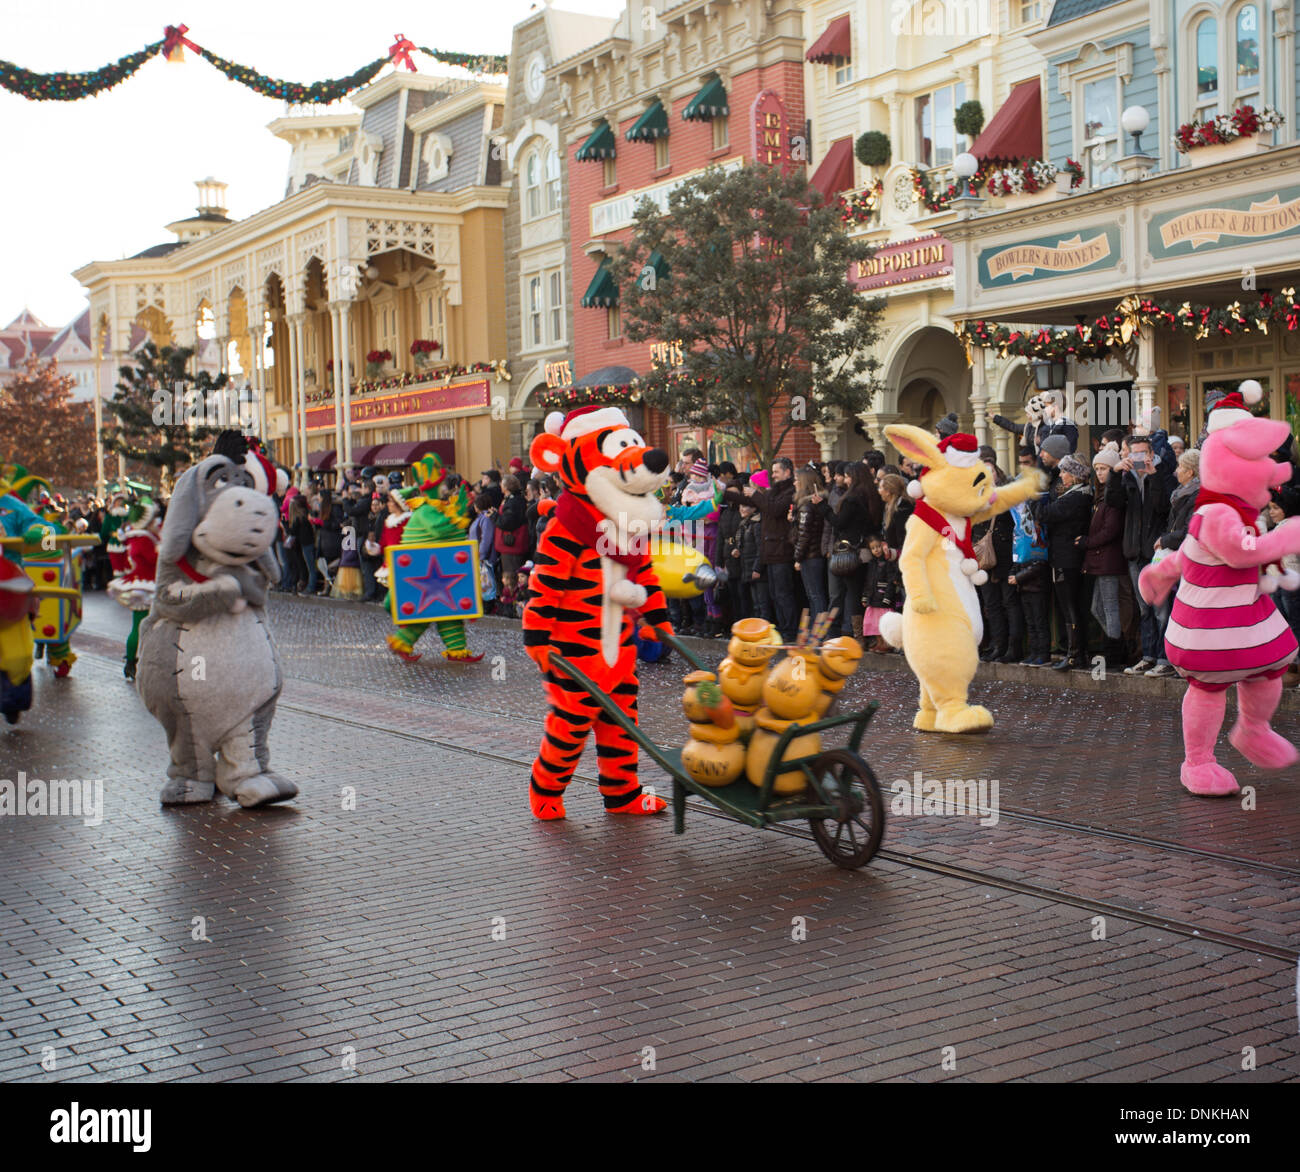 Euro Disney High Stock Photography and - Alamy